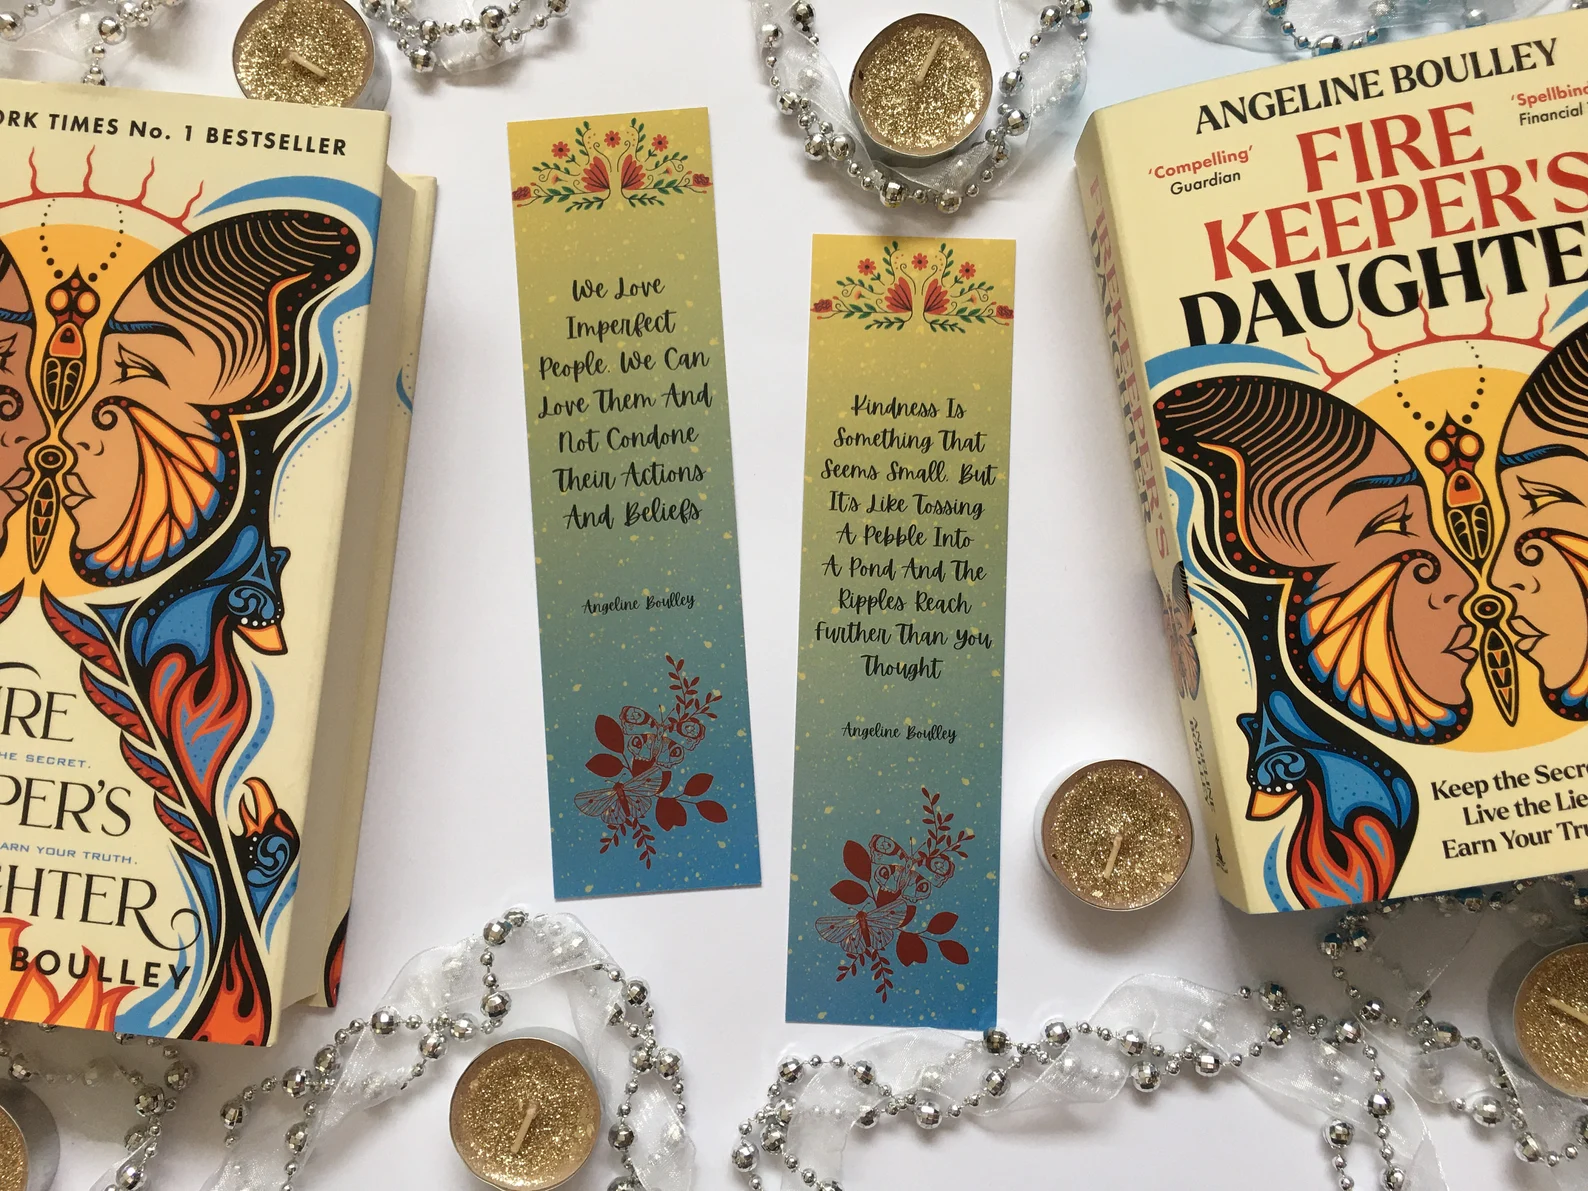 Two bookmarks with quotes from the book Firekeeper's Daughter